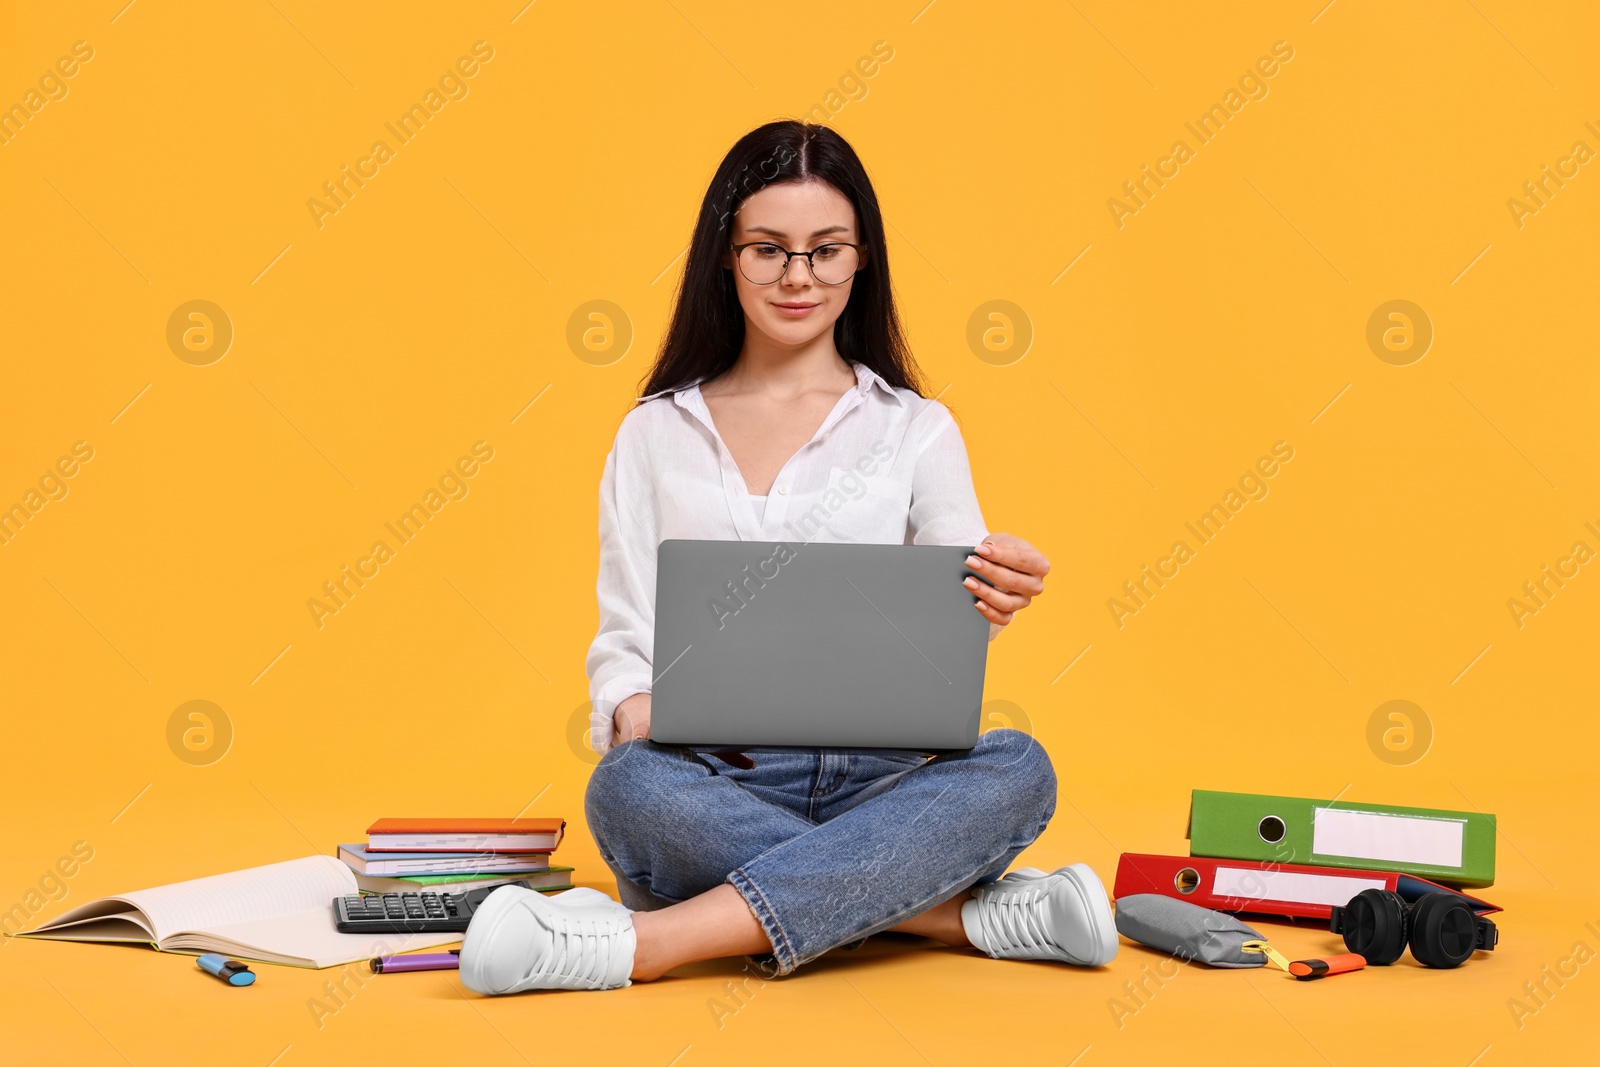 Photo of Student with laptop sitting among books and stationery on yellow background